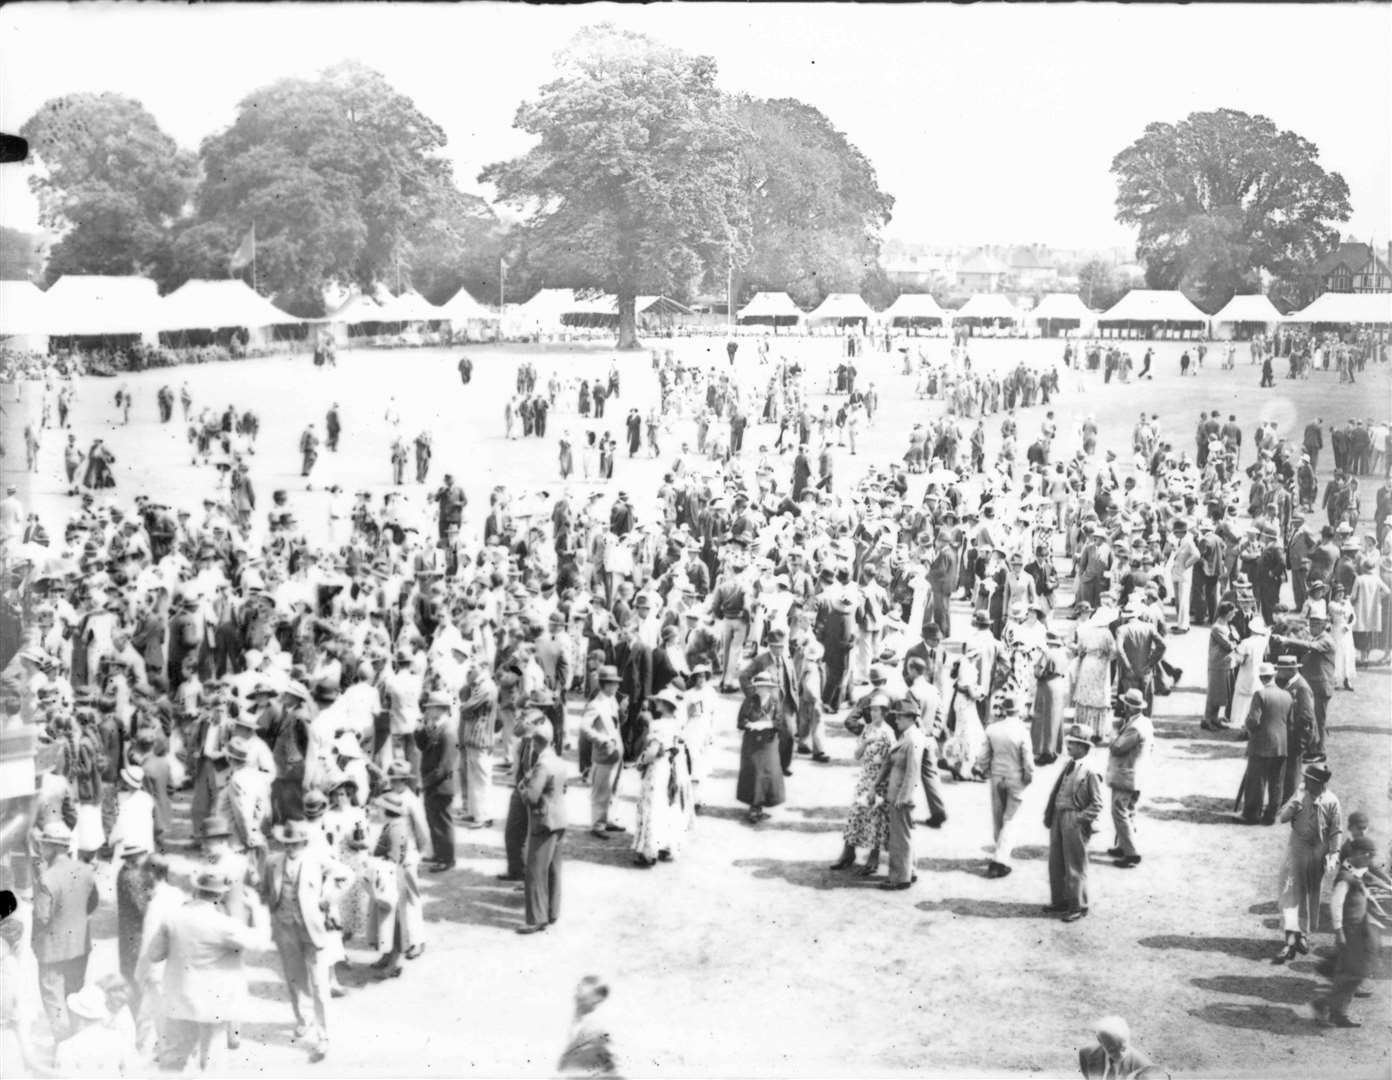 Cricket week at the St Lawrence Ground in 1933. It is held the first week in August and always a popular social affair. Here, crowds gather against a backdrop of tents lining the ground, which was opened in 1847. File picture used in 'Images of Canterbury' book